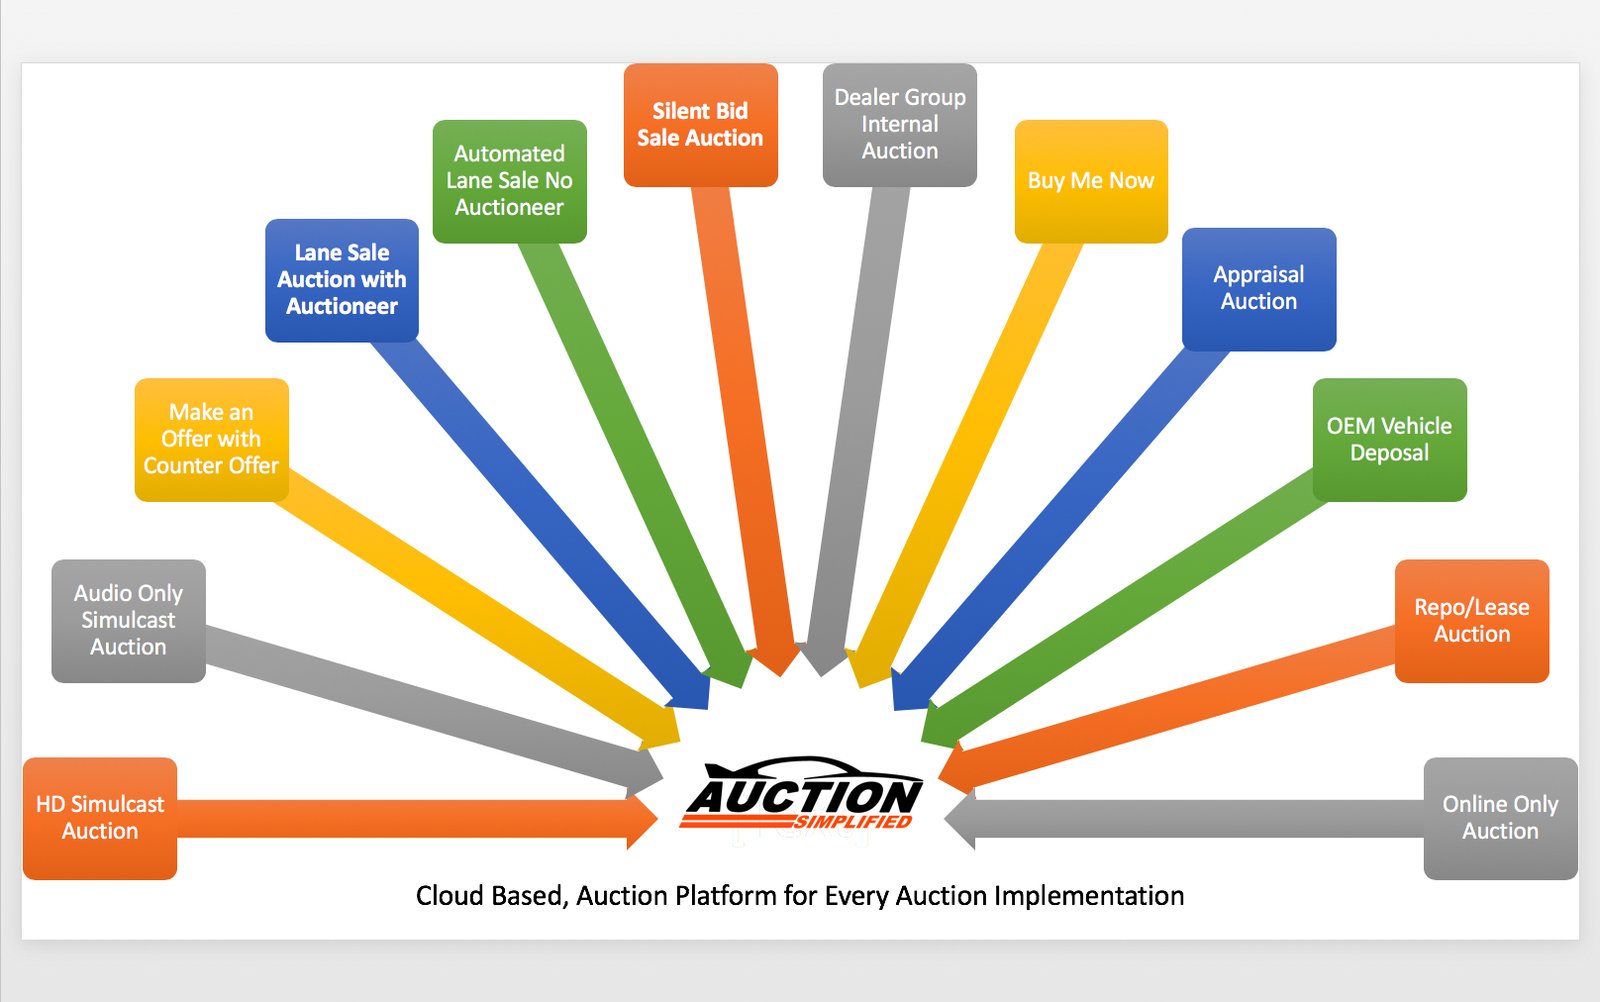 Auction Simplified software implementations